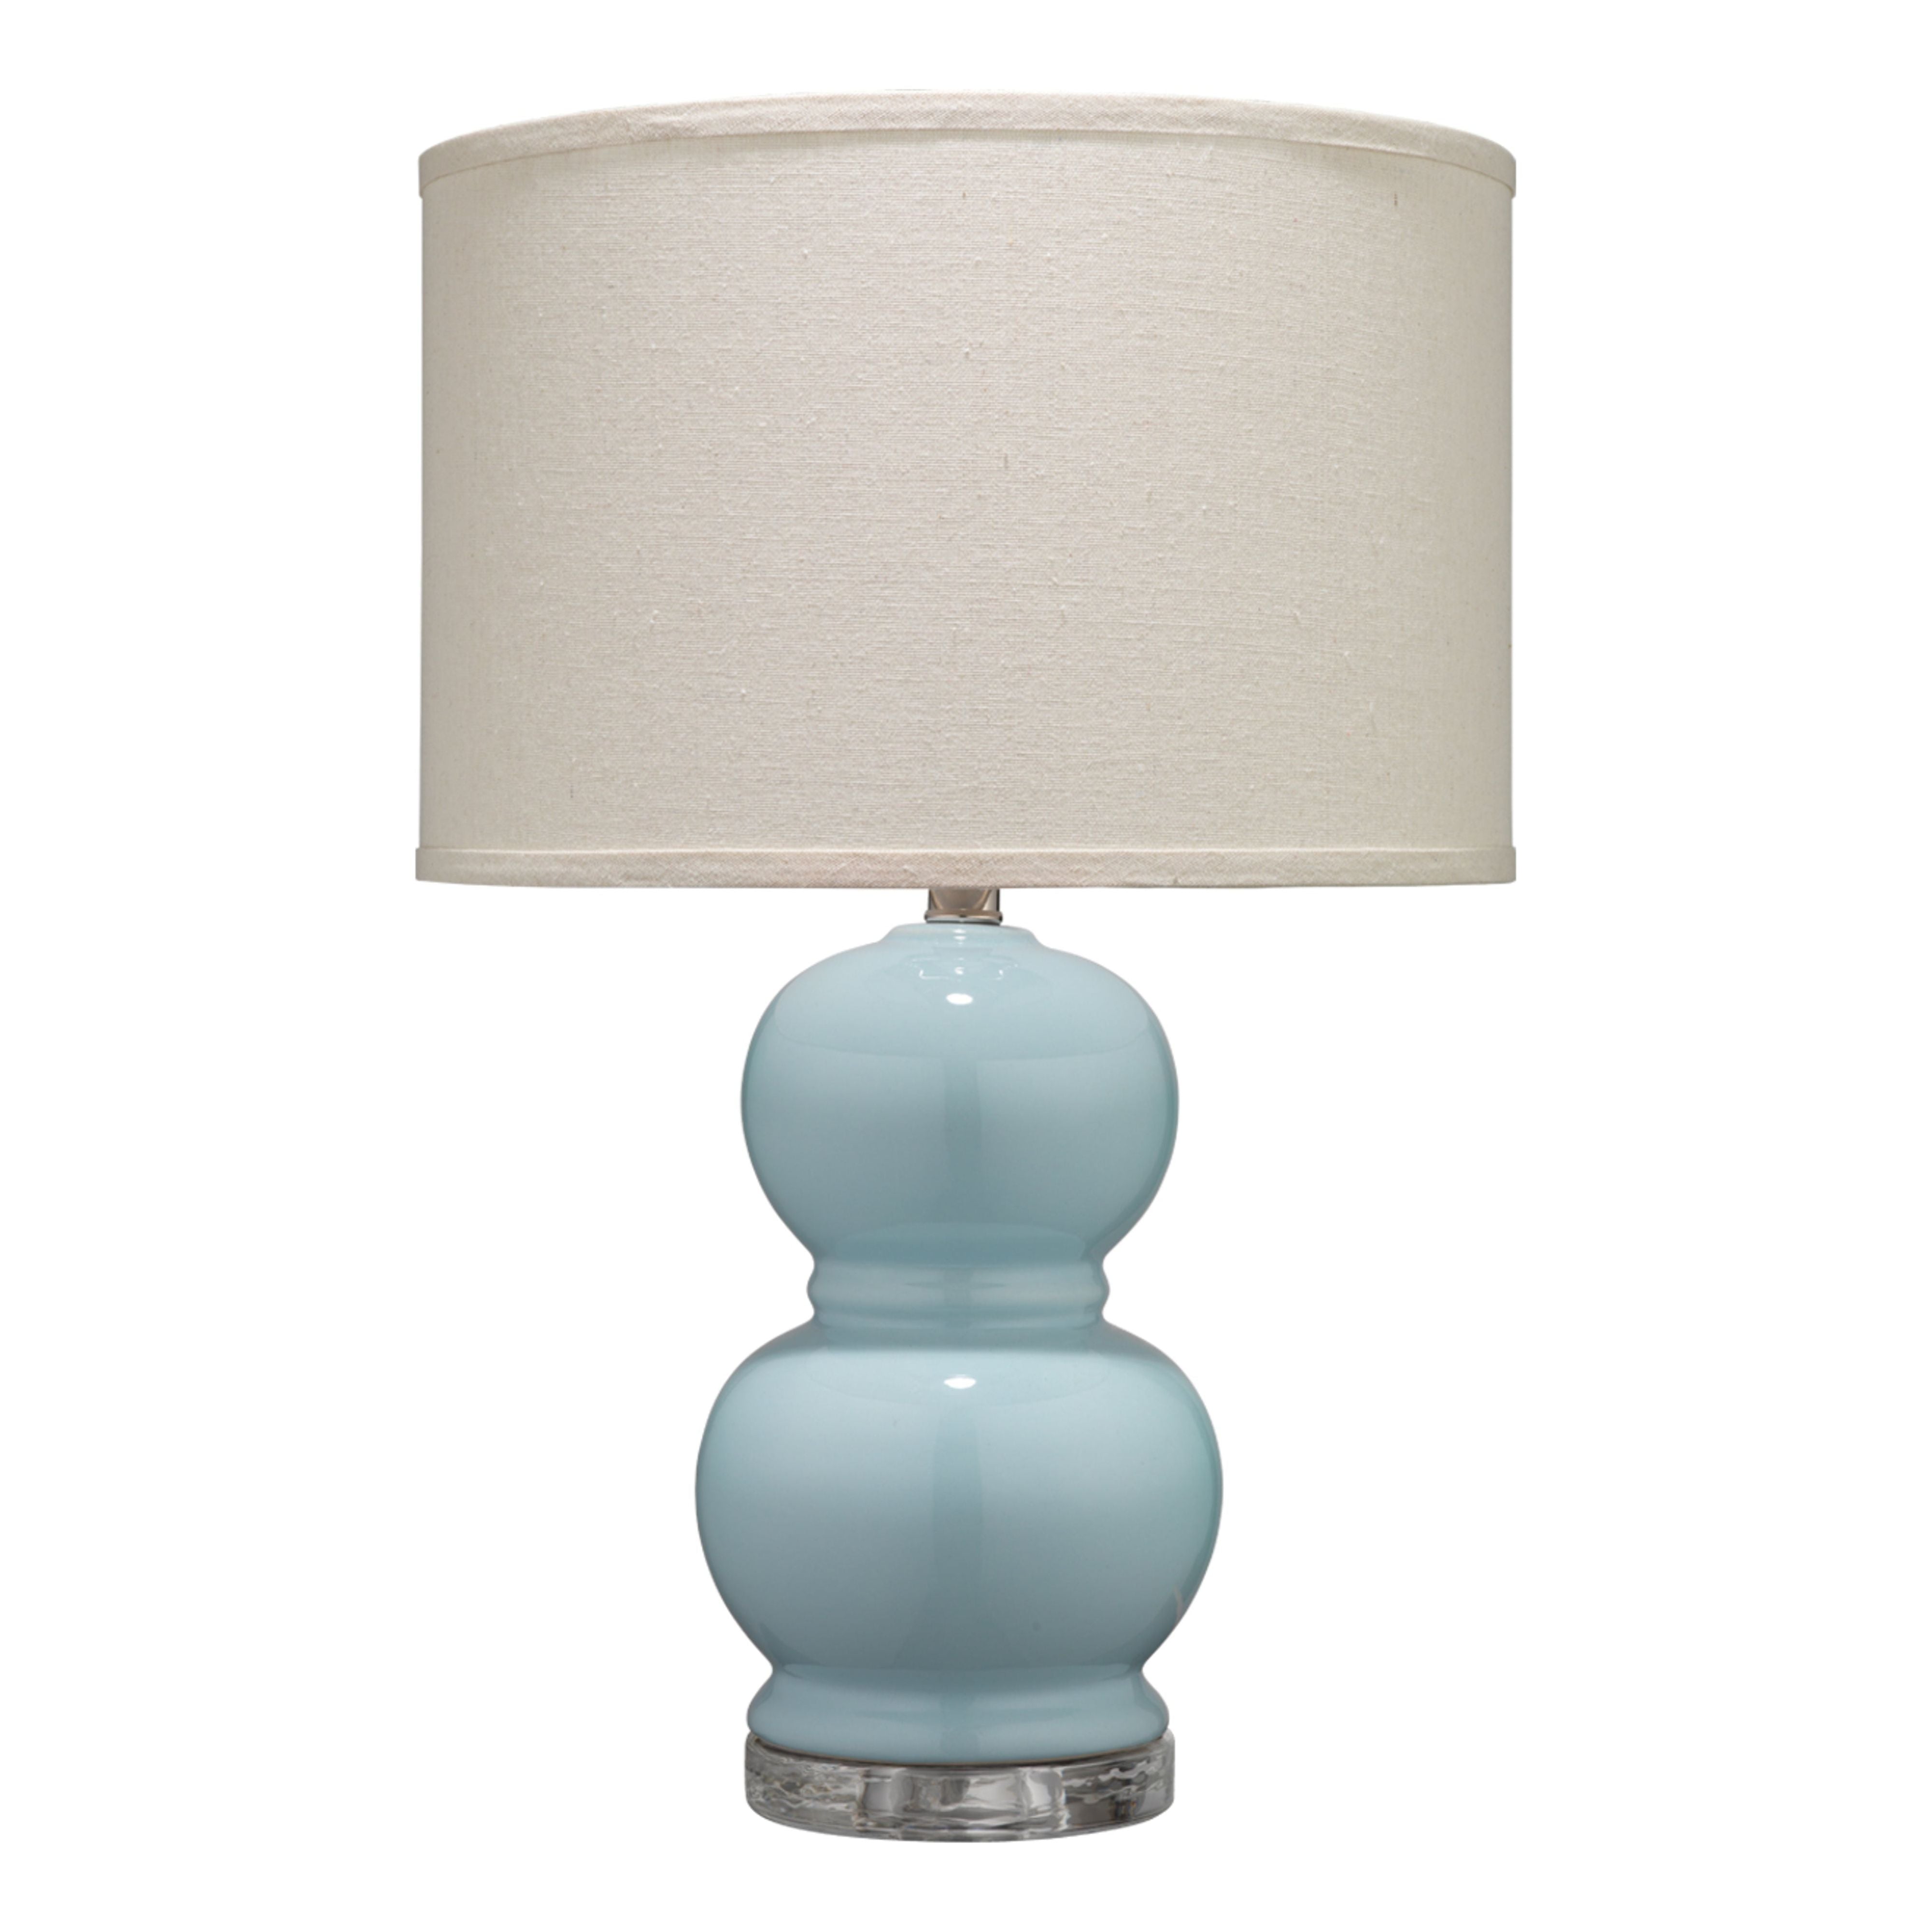 Jamie Young Company - BLBUBSB255MD - Bubble Table Lamp - Bubble - Light Blue